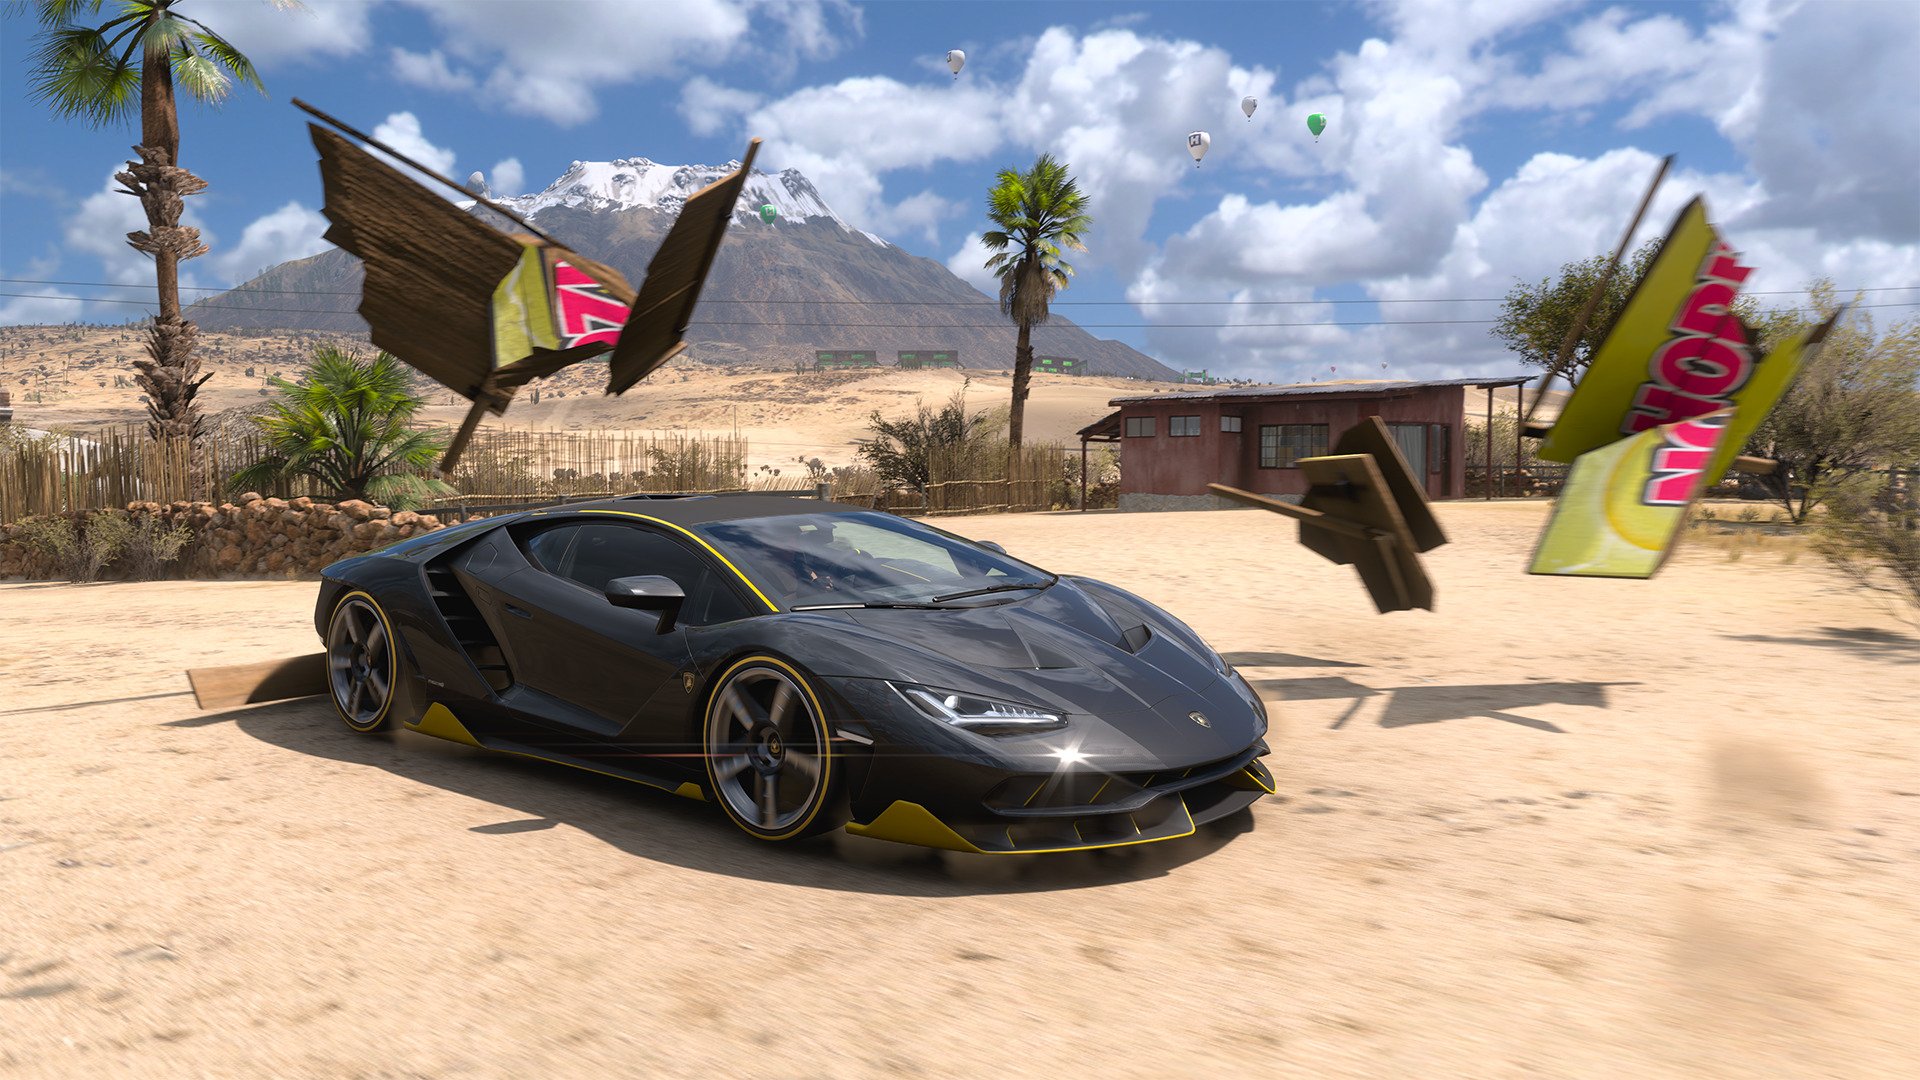 Forza Horizon 3 tips to guide you to victory